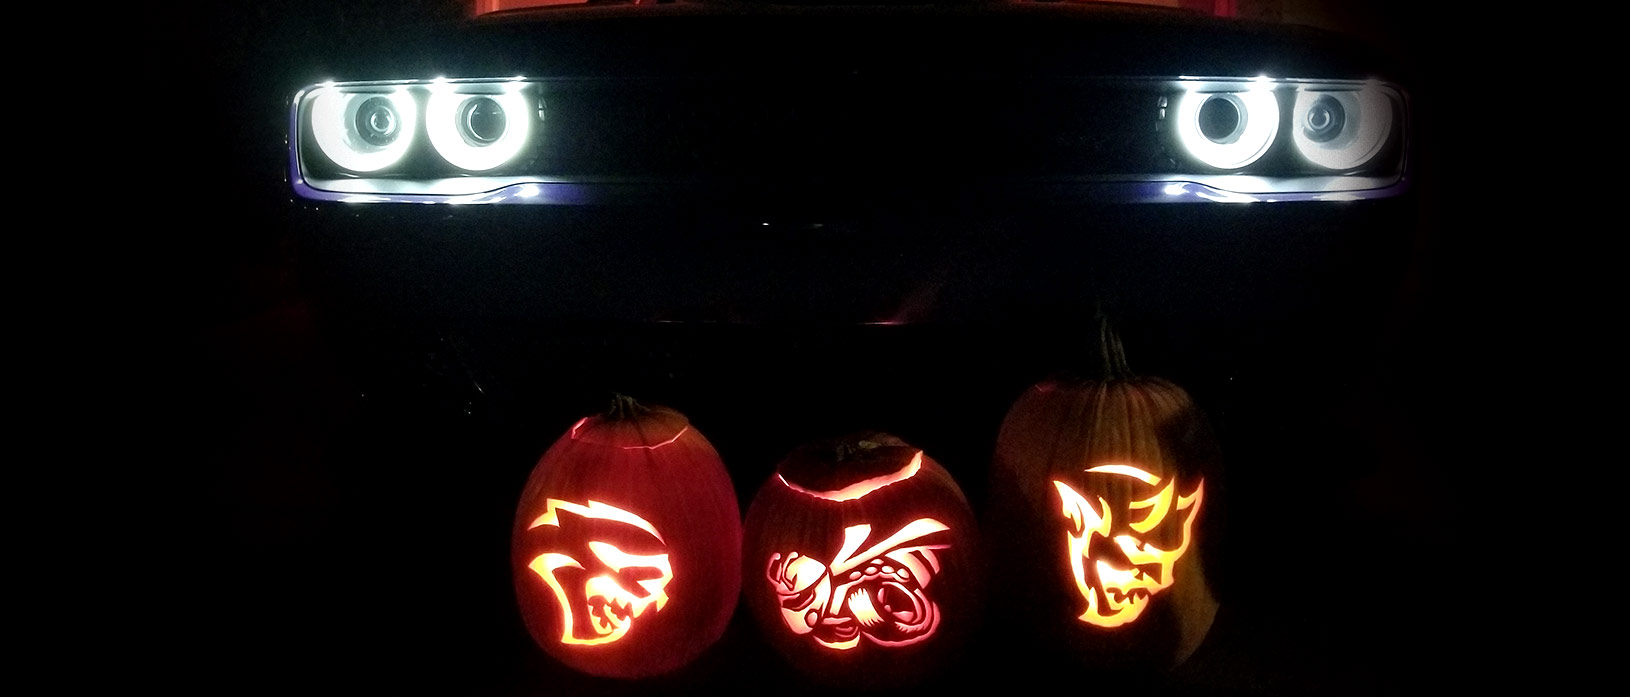 Hellcat, Angry Bee and Demon pumpkins in front of Dodge Hellcat with headlights lit.